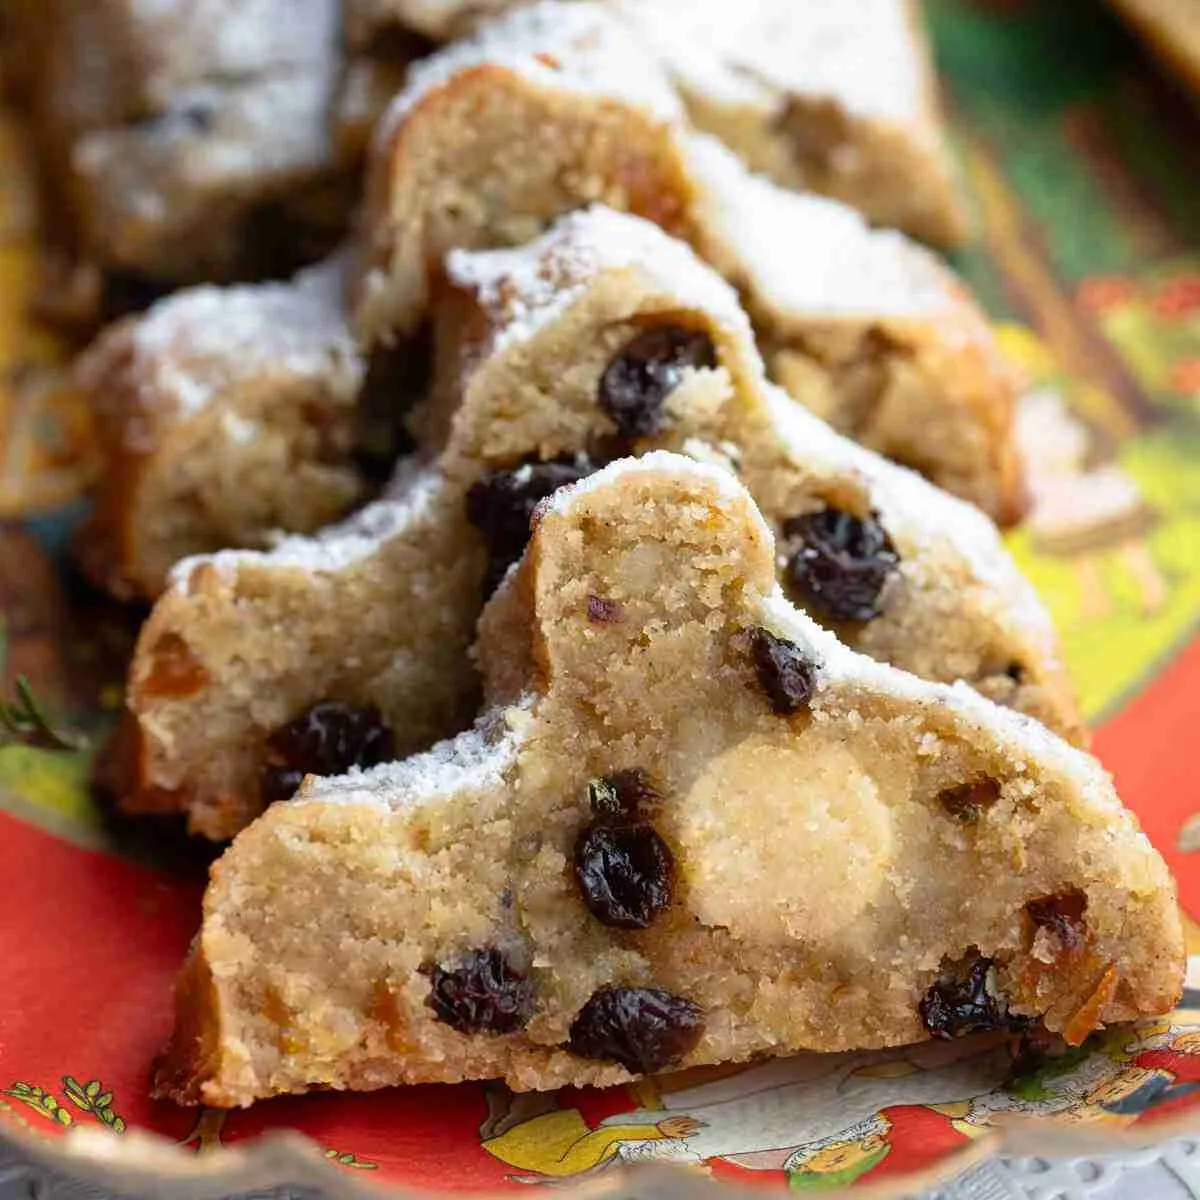 Slices of Mini Stollen with marzipan, a German Christmas Cake (Christstollen).